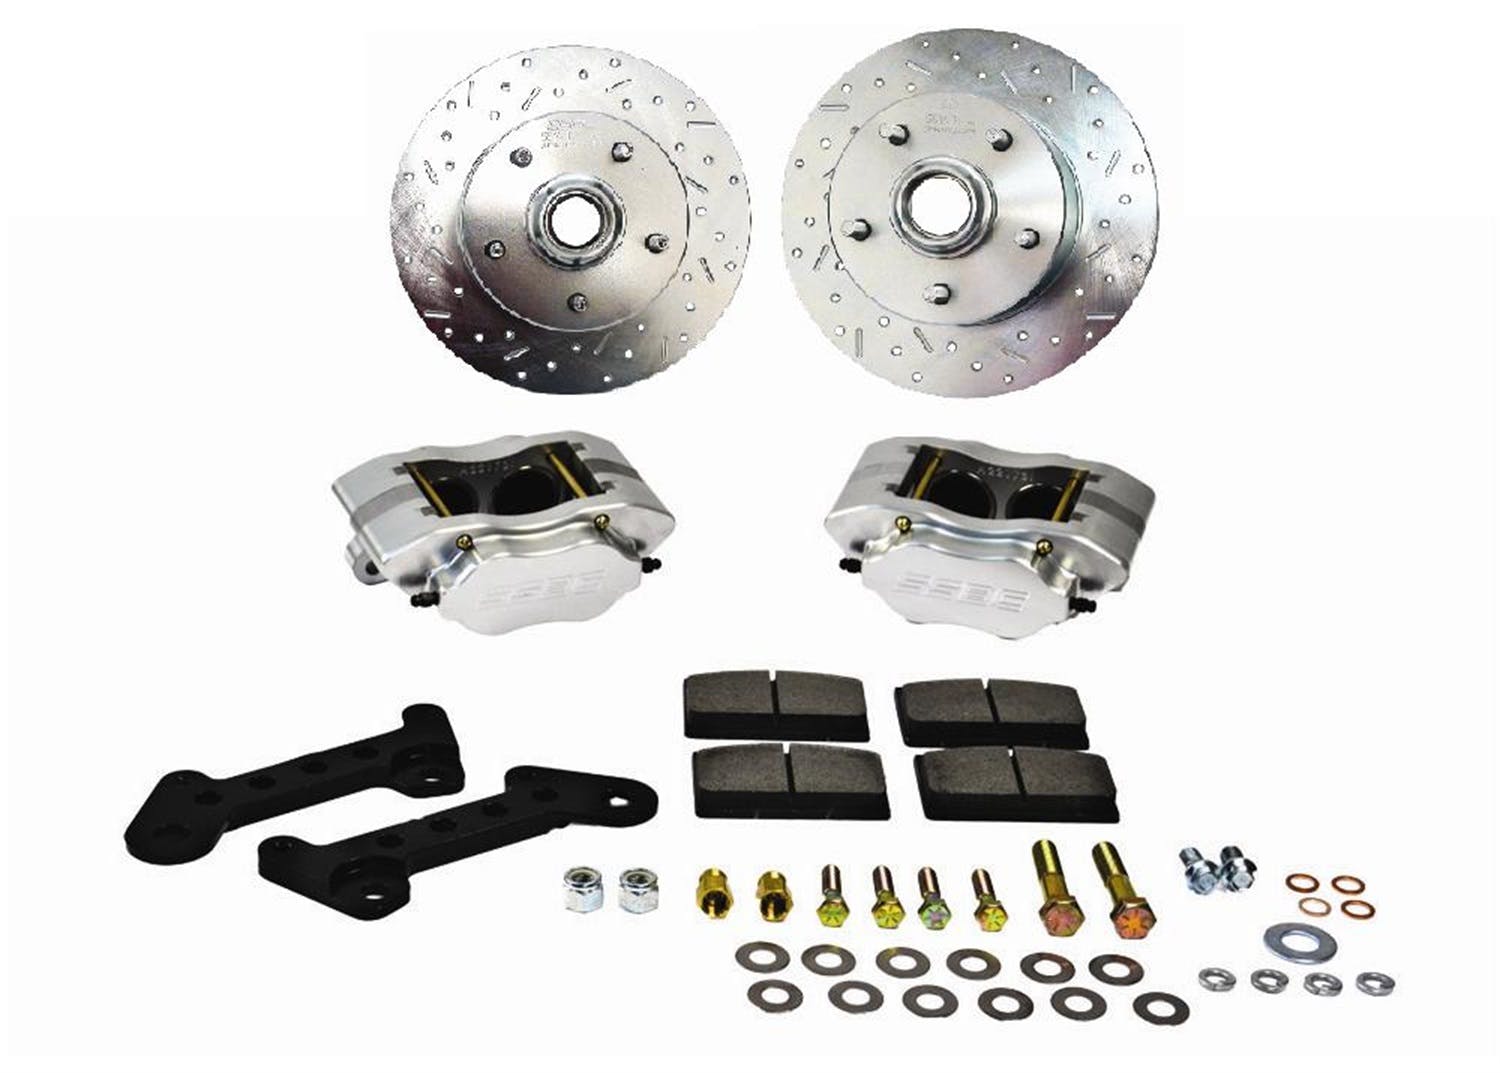 Stainless Steel Brakes W123-24R Comp R W123-24 kit w/red calipers